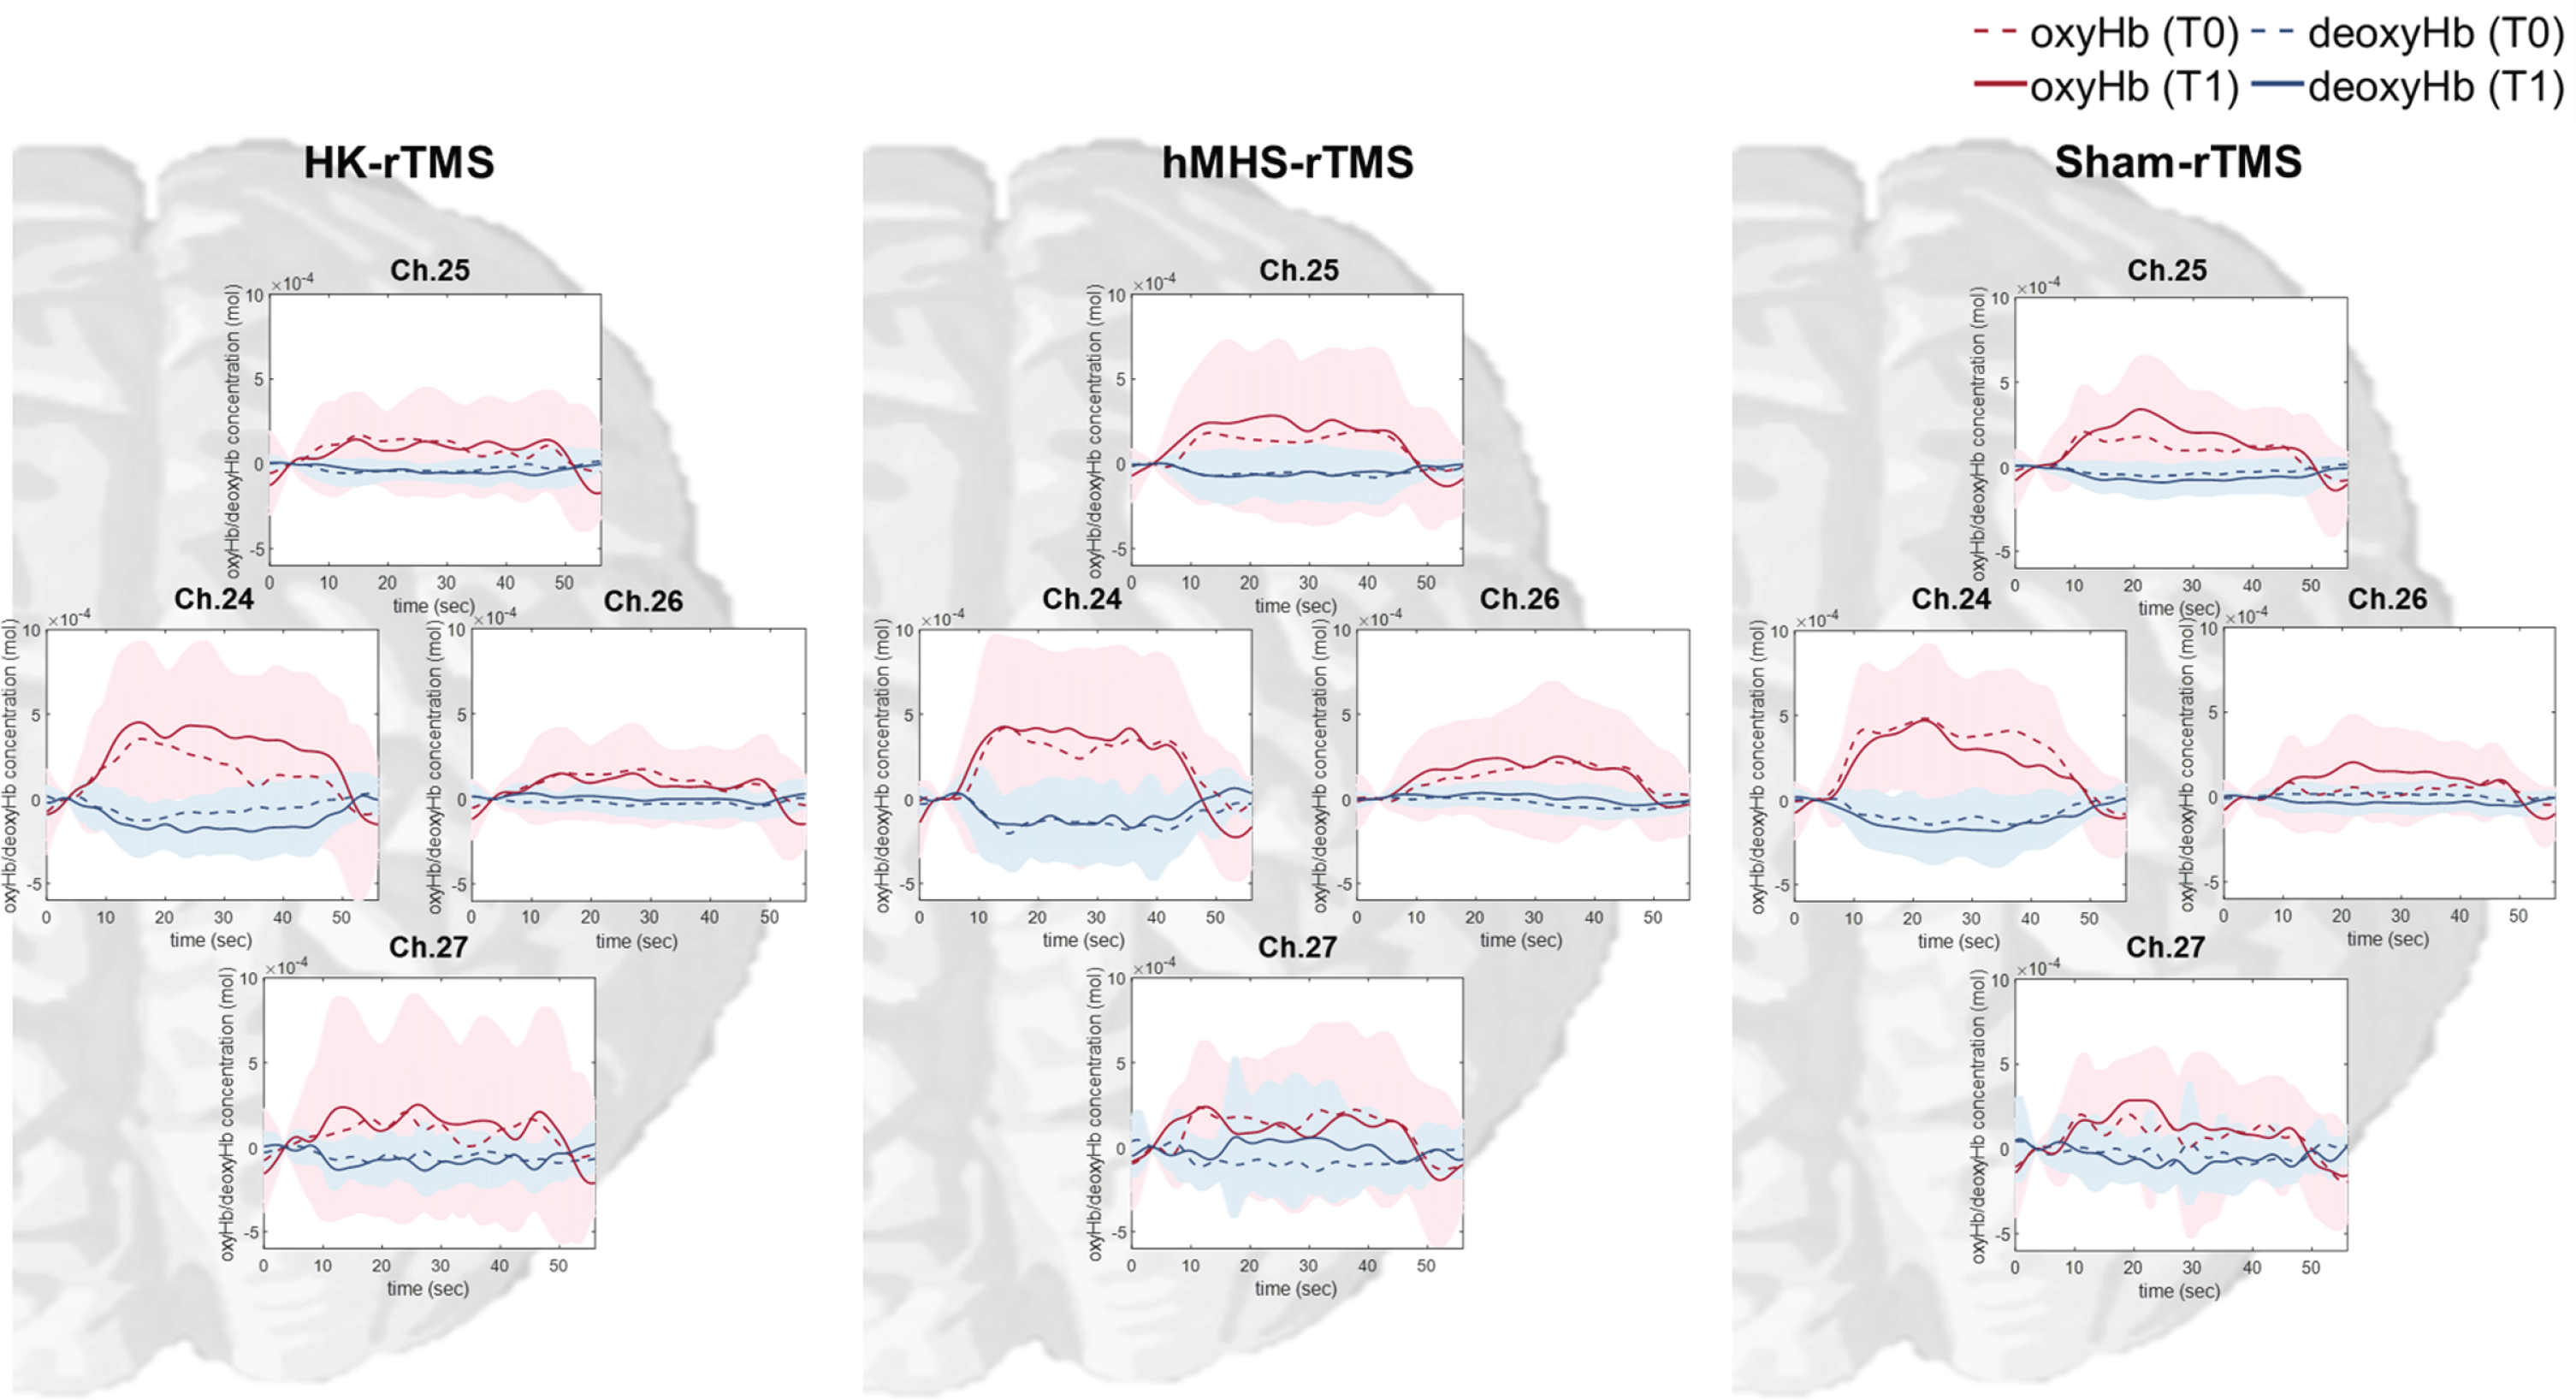 Time-series plot of changes in oxyHb and deoxyHb concentrations in the non-dominant motor cortical region during the non-dominant hand motor task. The red dotted line represents the oxyHb concentration at the point before stimulation (oxyHb T0), and the red solid line represents the oxyHb concentration at the point after stimulation (oxyHb T1). The blue dotted line represents the deoxyHb concentration at the point before stimulation (deoxyHb T0), and the blue solid line represents the deoxyHb concentration at the point after stimulation (deoxyHb T1). The colored background represents the standard deviation. In channel 24, oxyHb concentration was remarkably increased during the motor task compared to T0 in the HK-rTMS and hMHS-rTMS. There was no change in the Sham-rTMS. oxyHb, oxyhemoglobin; deoxyHb; deoxyhemoglobin; M1, primary motor cortex; T0, before rTMS stimulation; T1, after rTMS stimulation; HK, anatomical hand knob; hMHS, hand motor hotspot